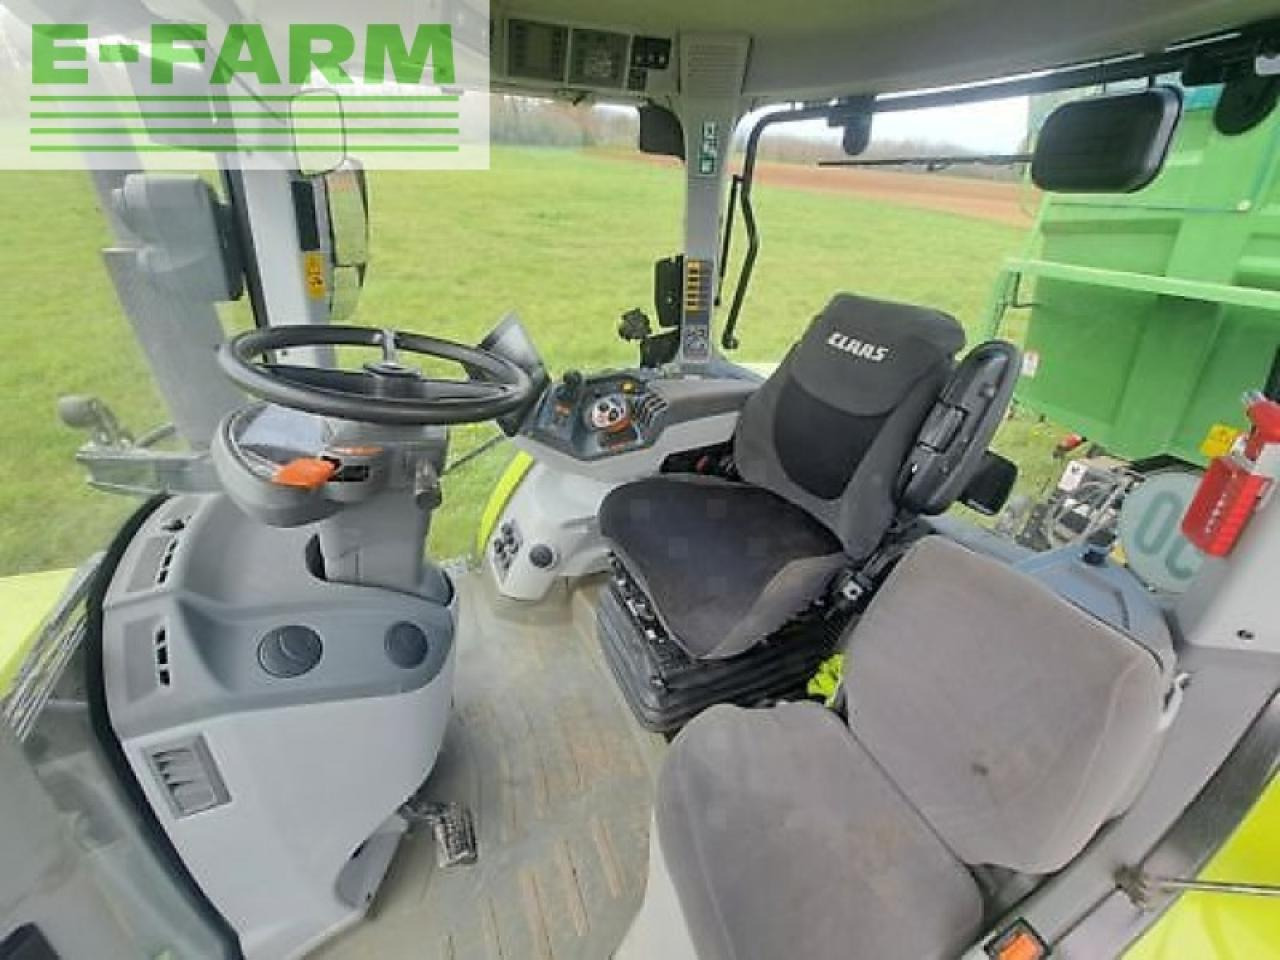 Tracteur agricole CLAAS arion 630 cmatic